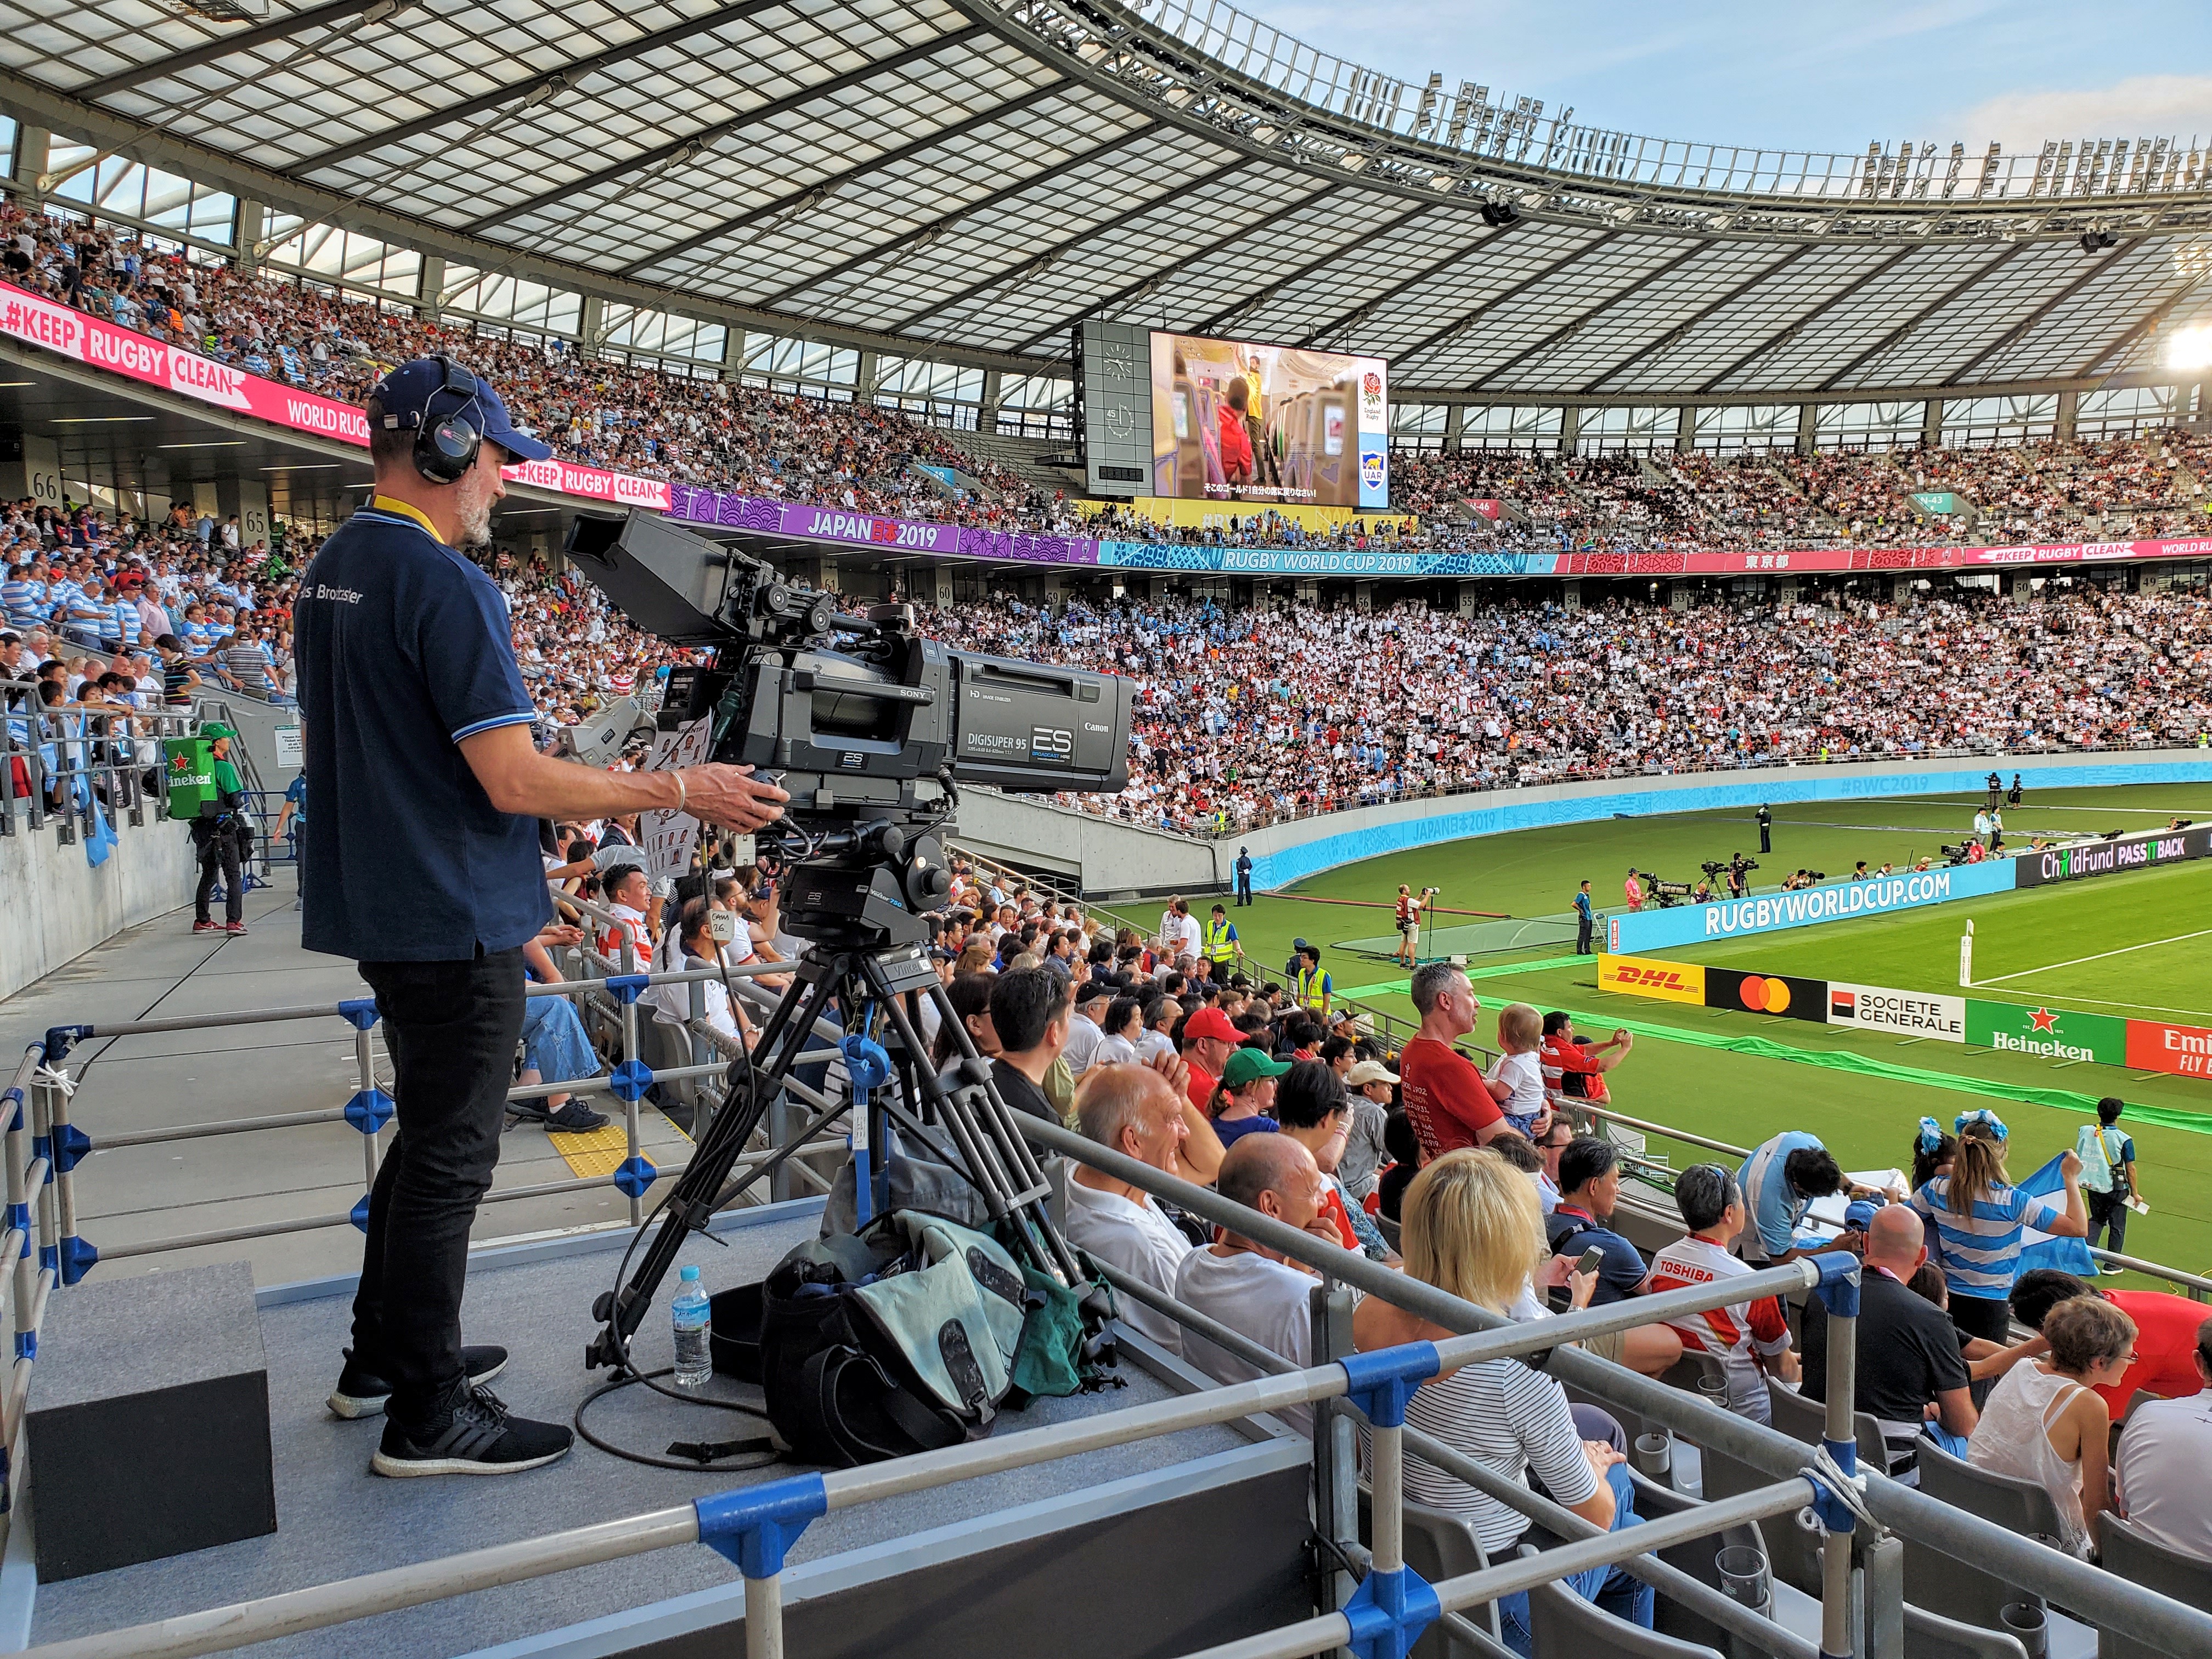 Live from the Rugby World Cup NEP Delivers for Match Coverage